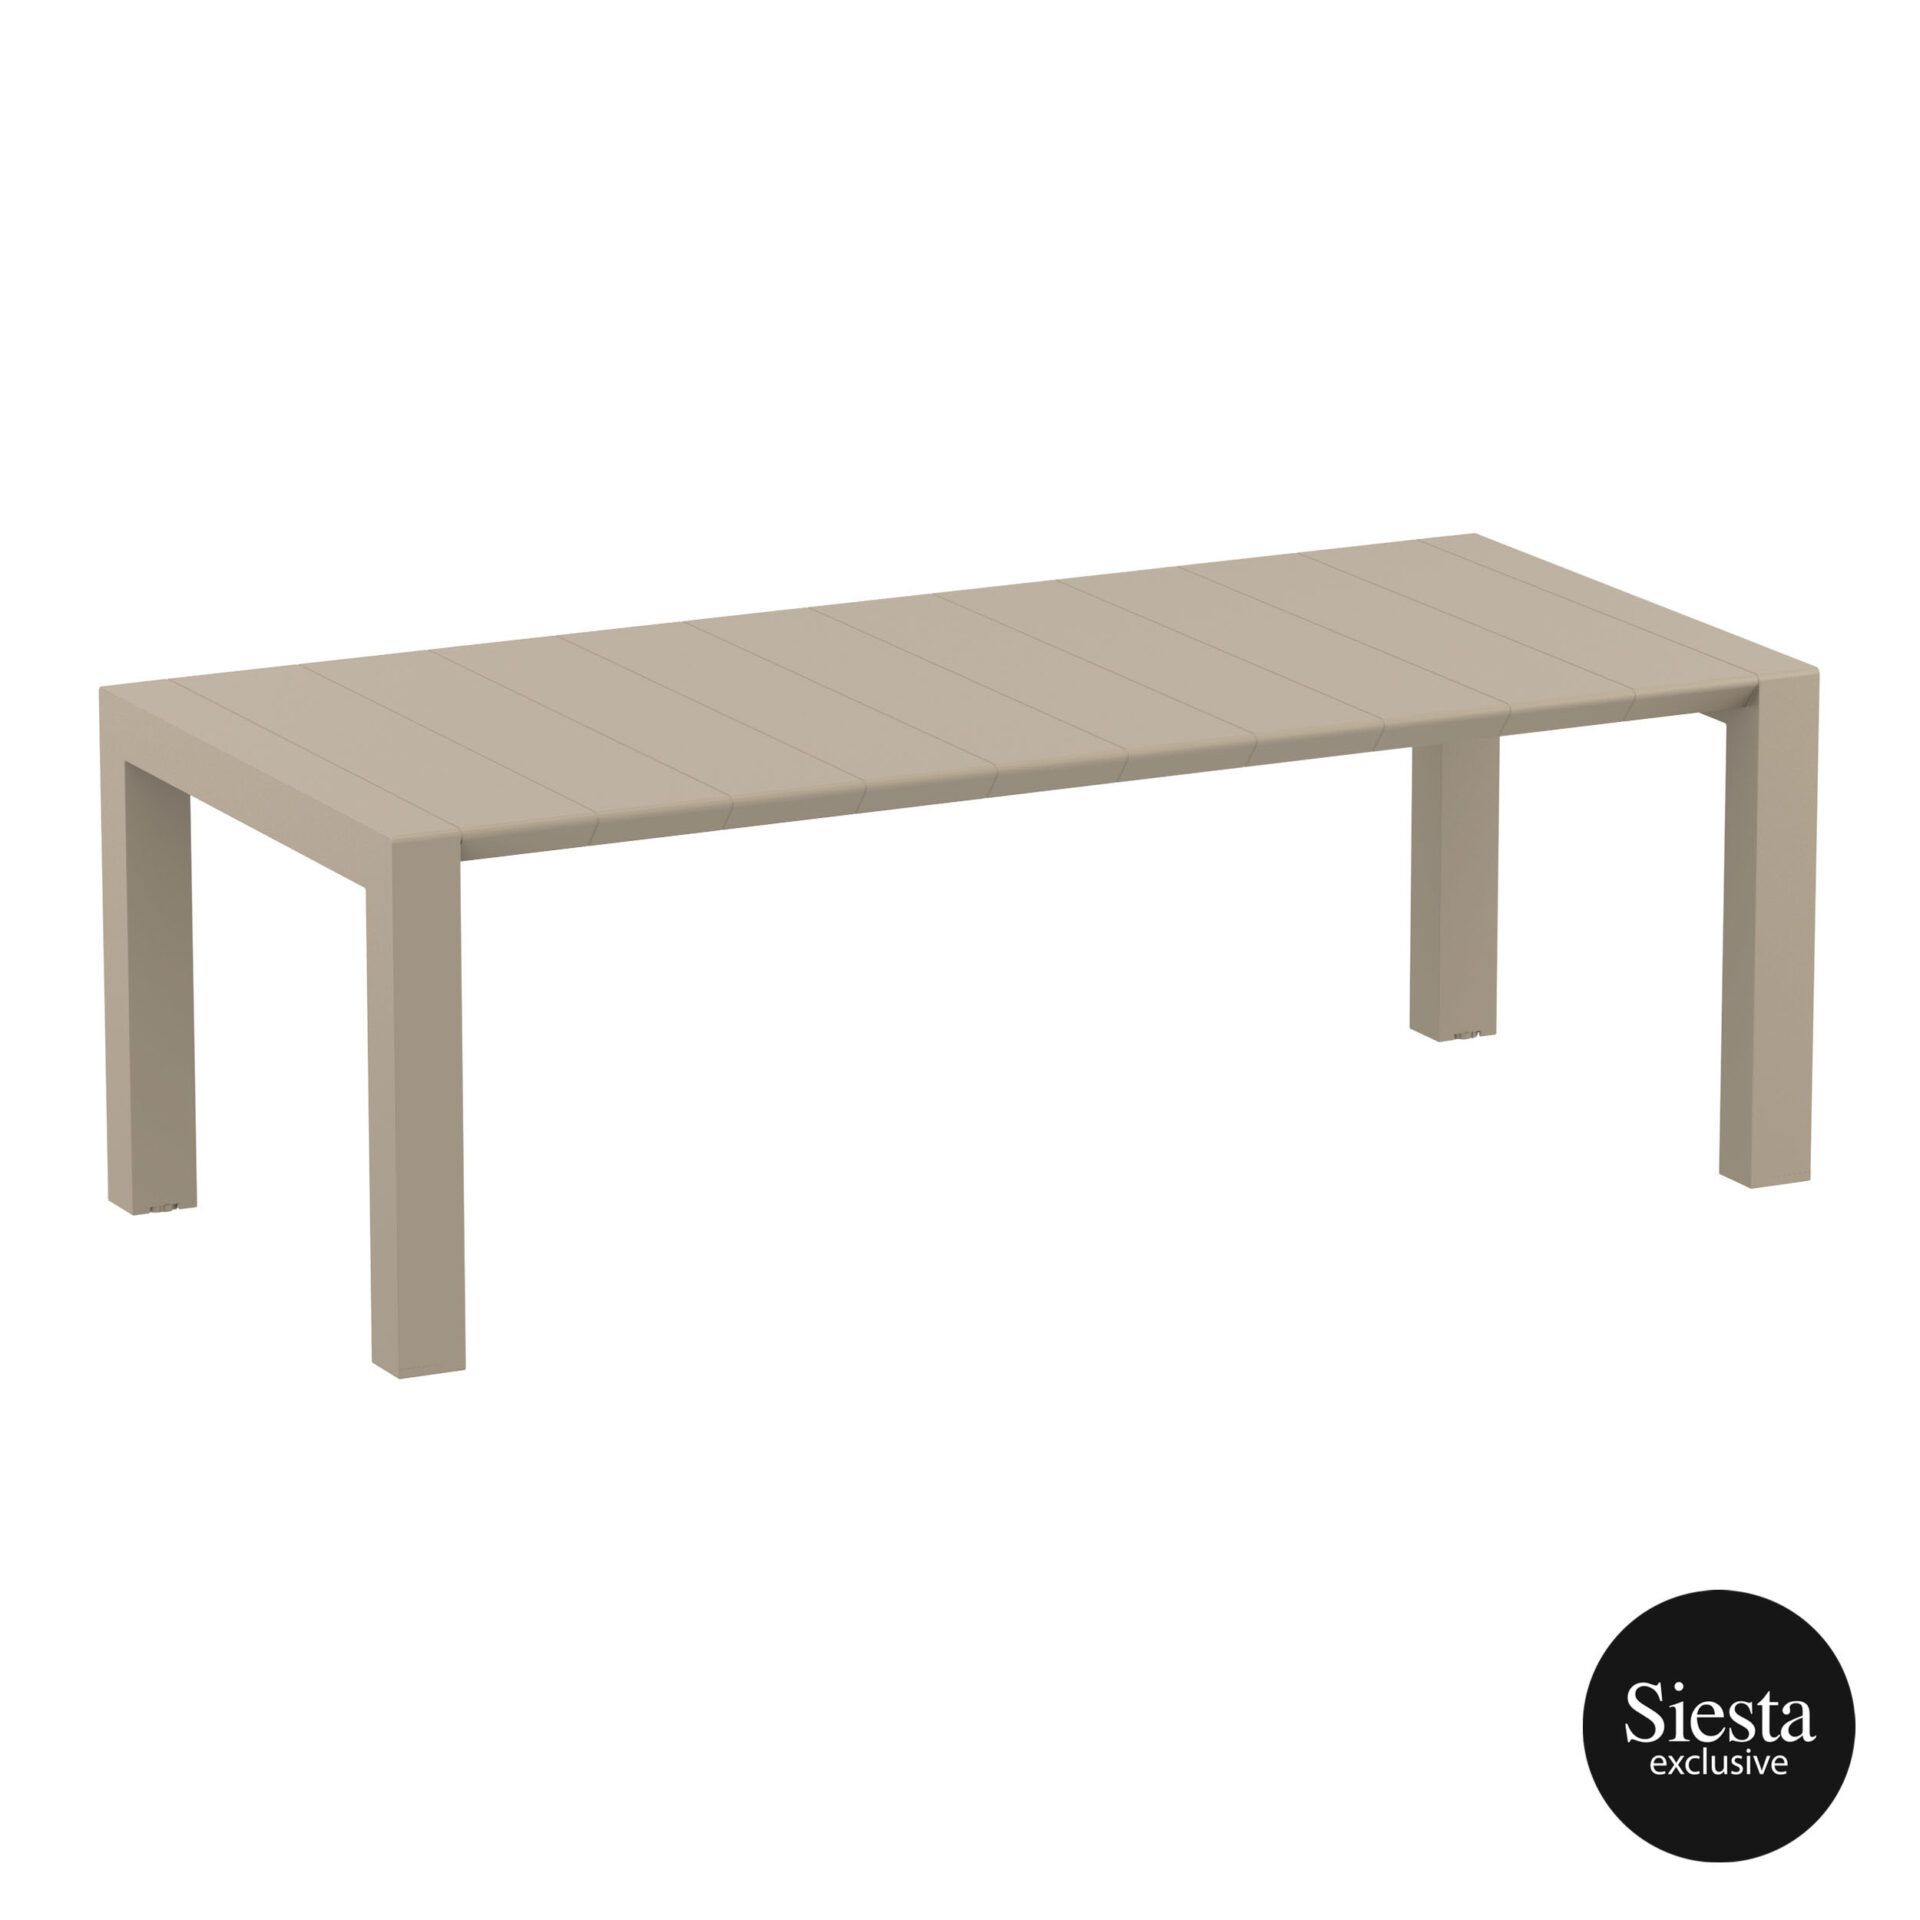 010 vegas table medium 220 taupe front side